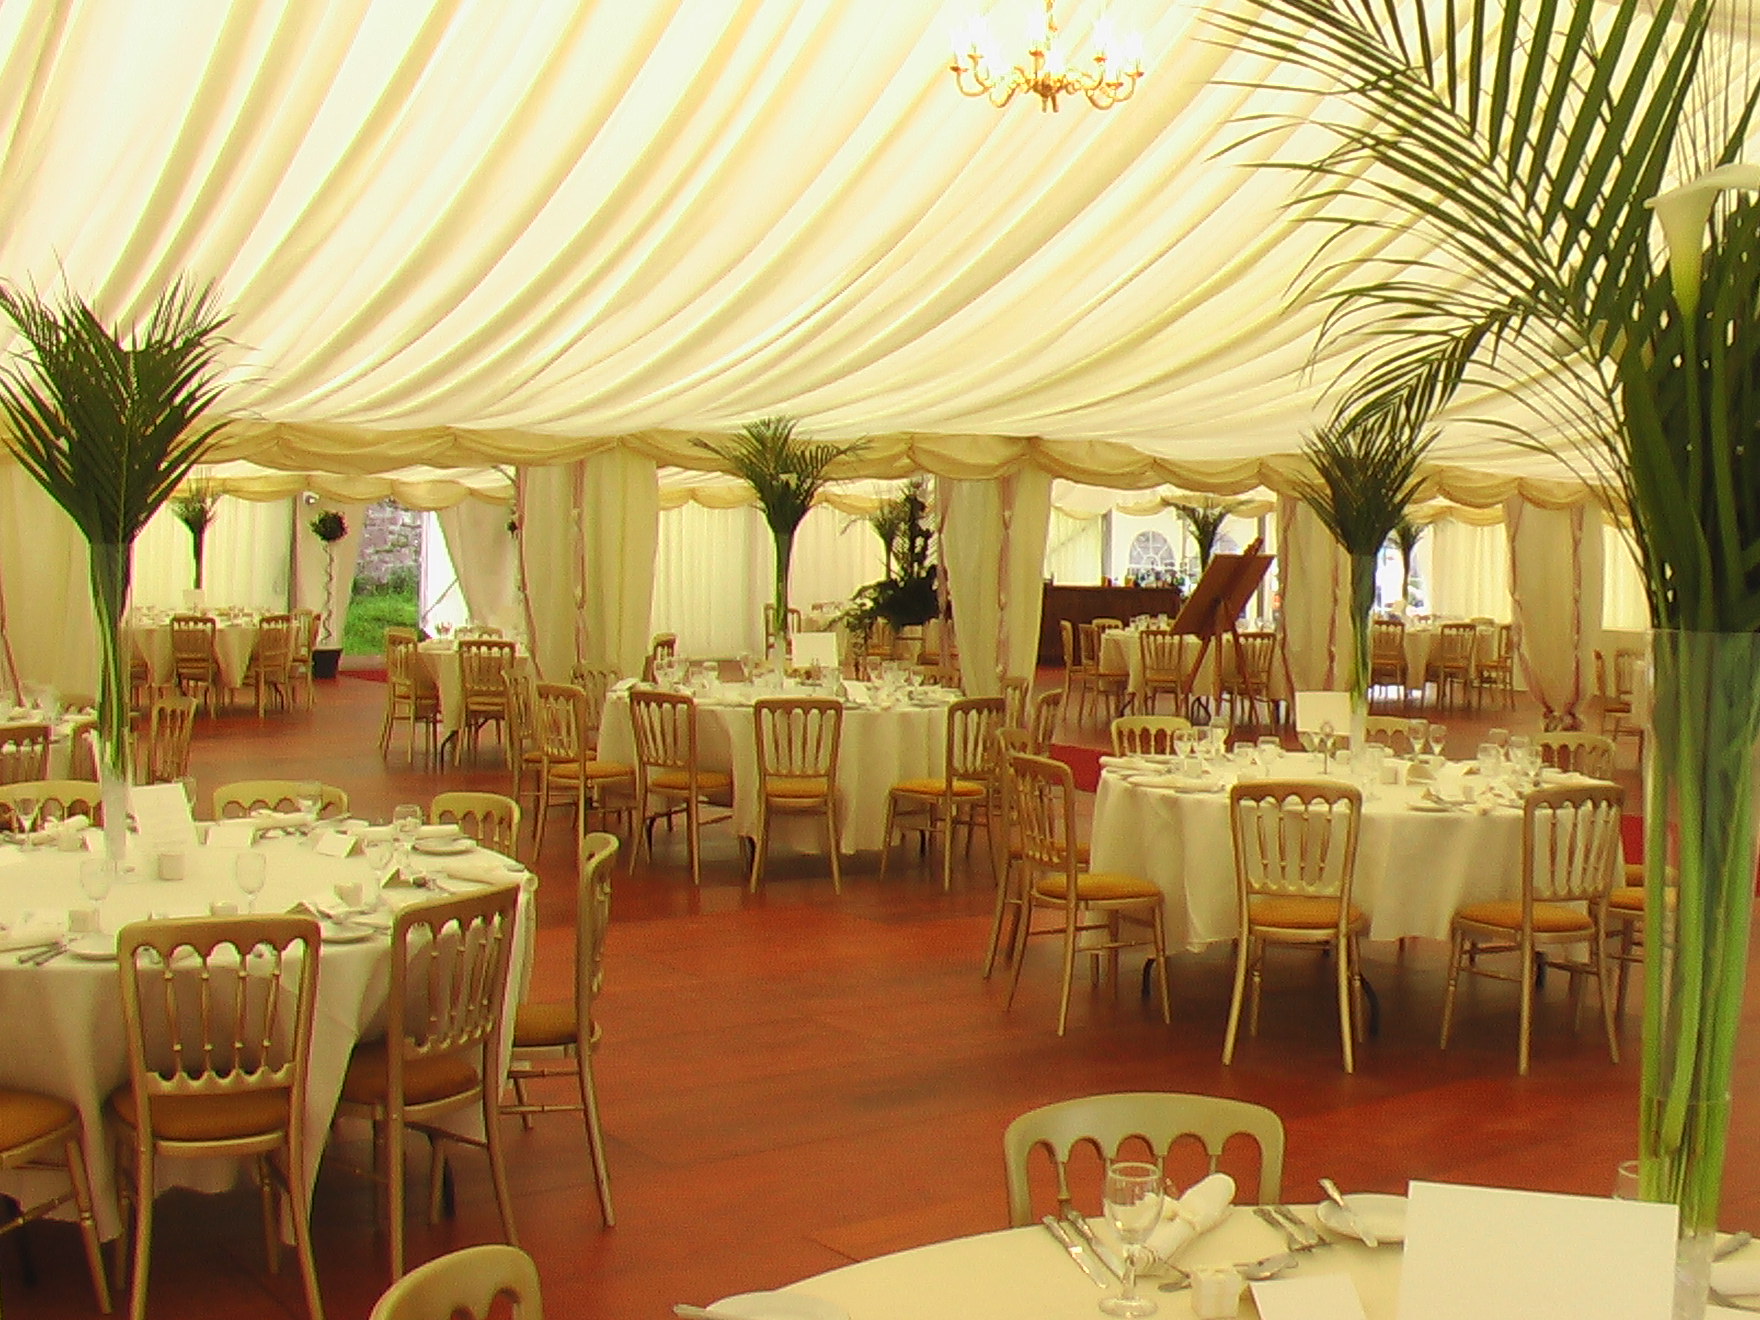 Wedding Marquee Ideas: Step 1 Selecting the Perfect Venue ...